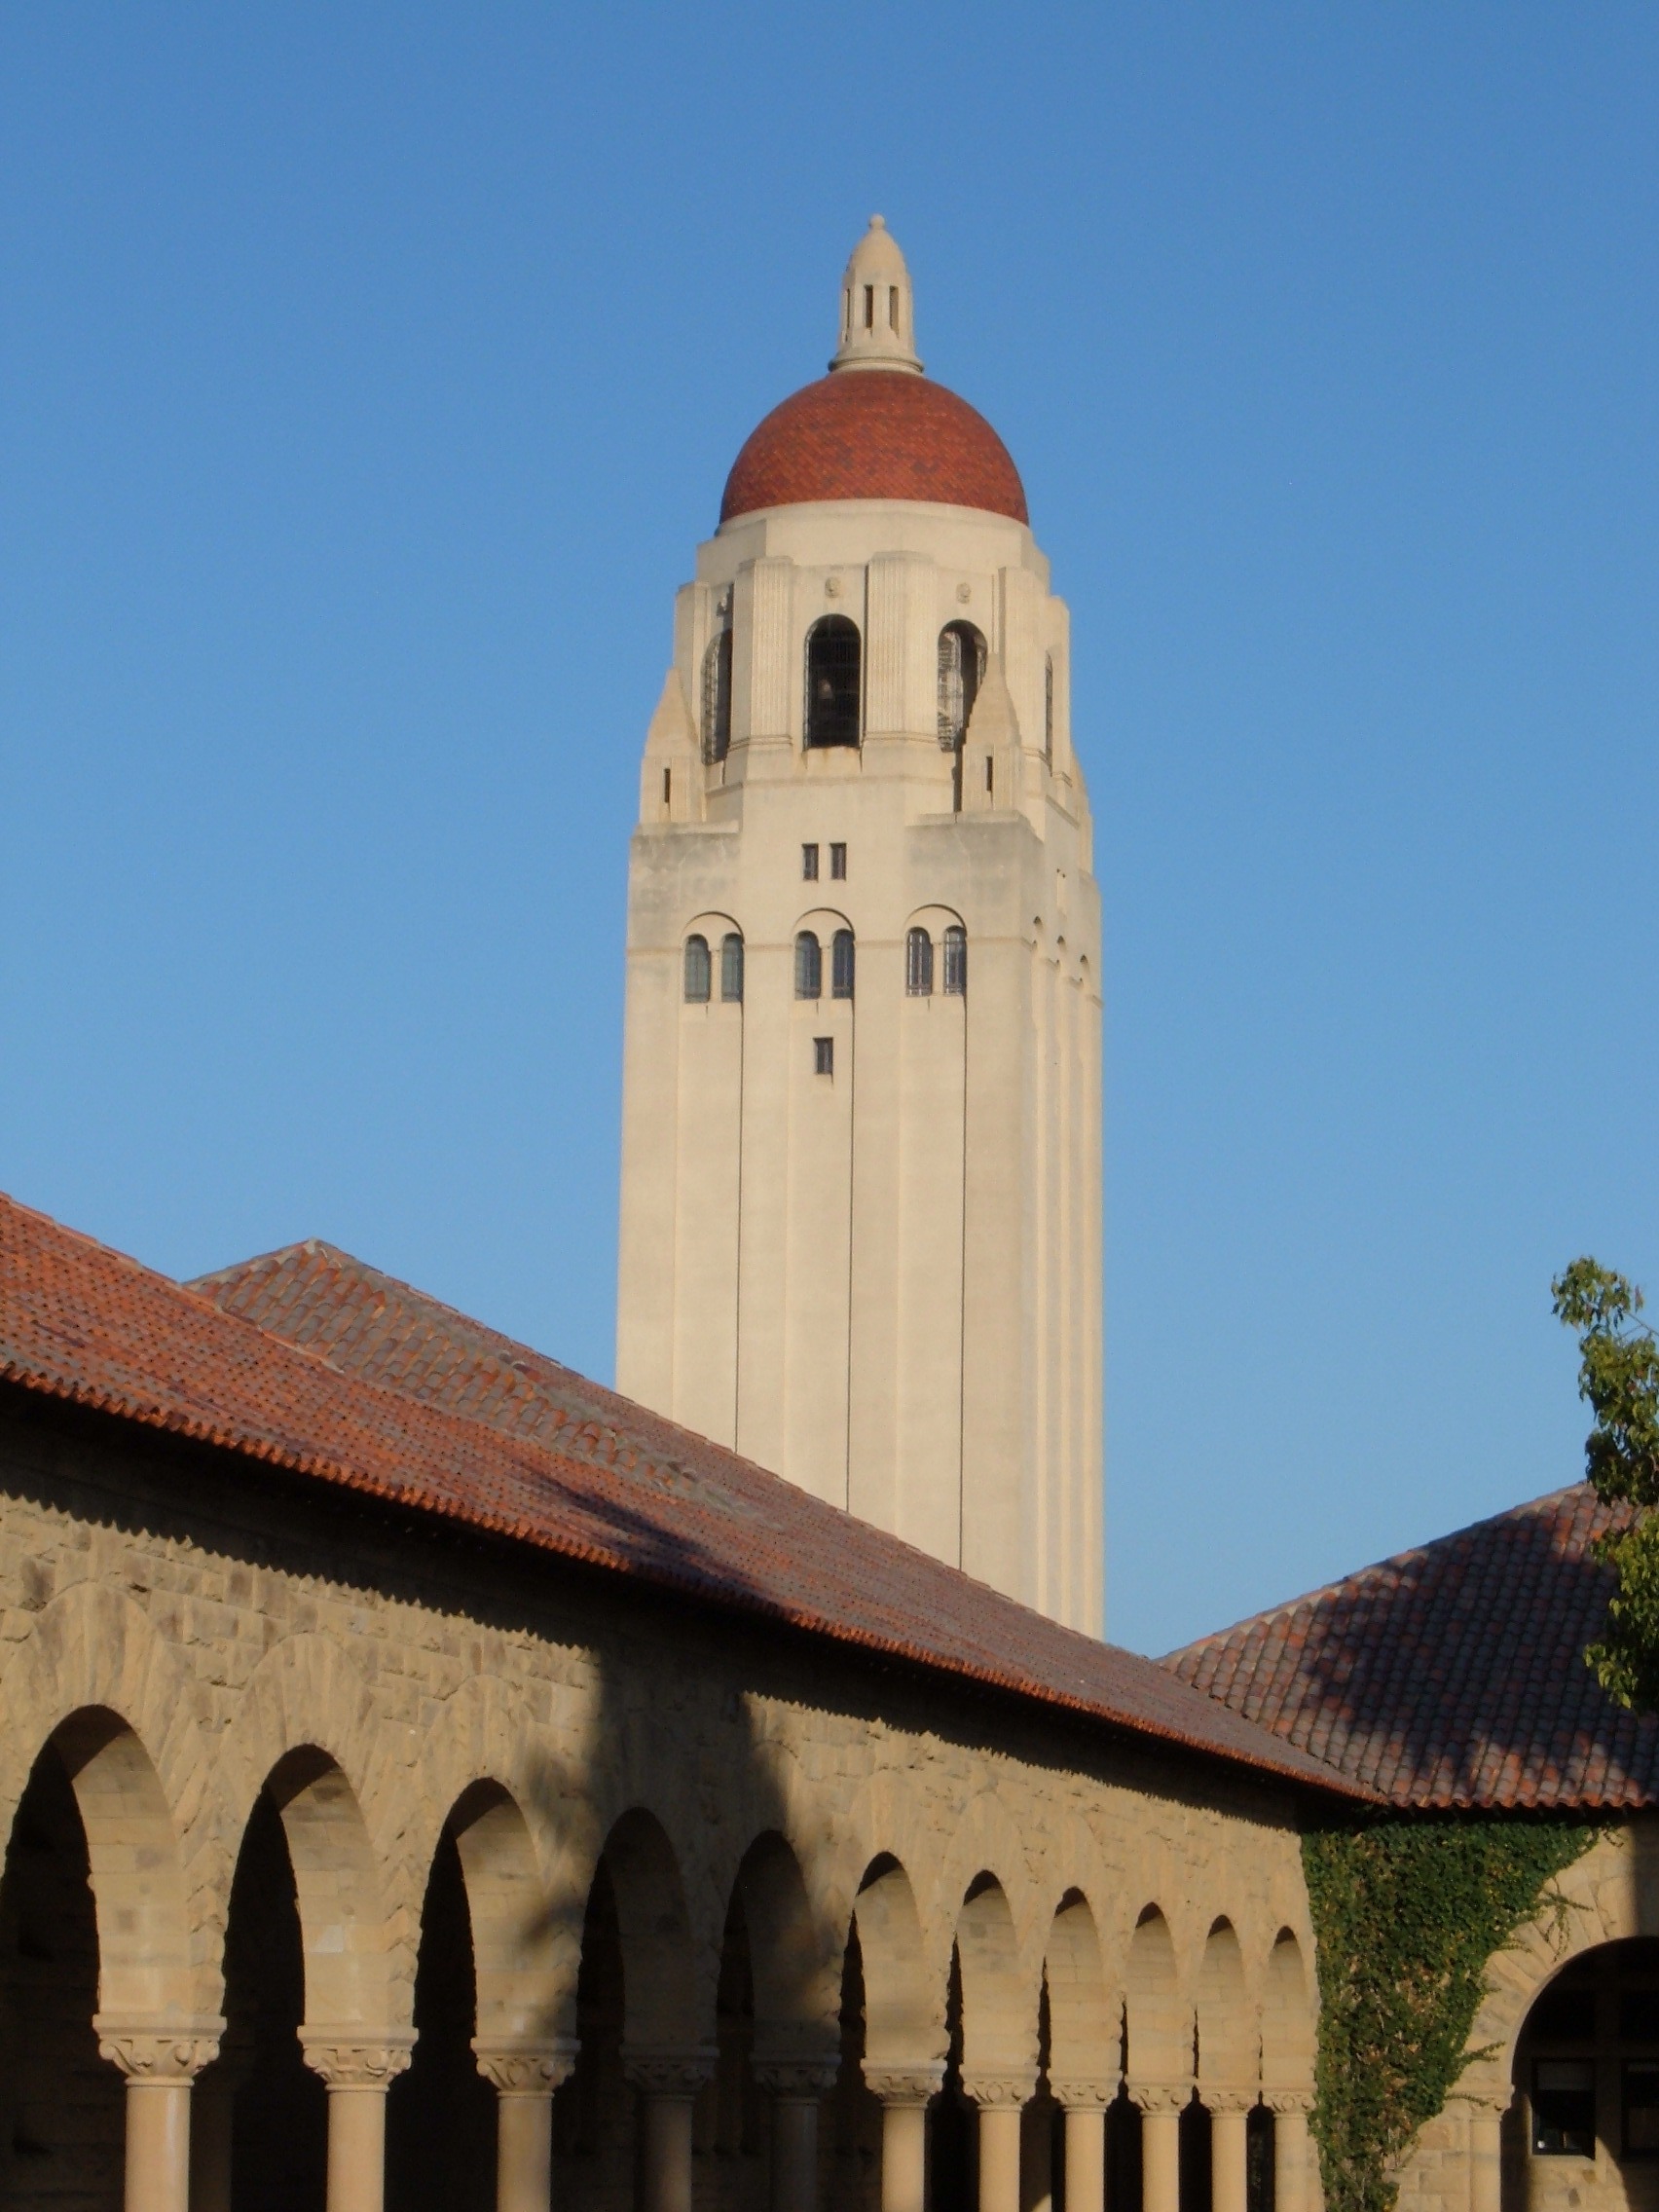 Hoover Tower: Stanford's Resident Intellectual Phallus